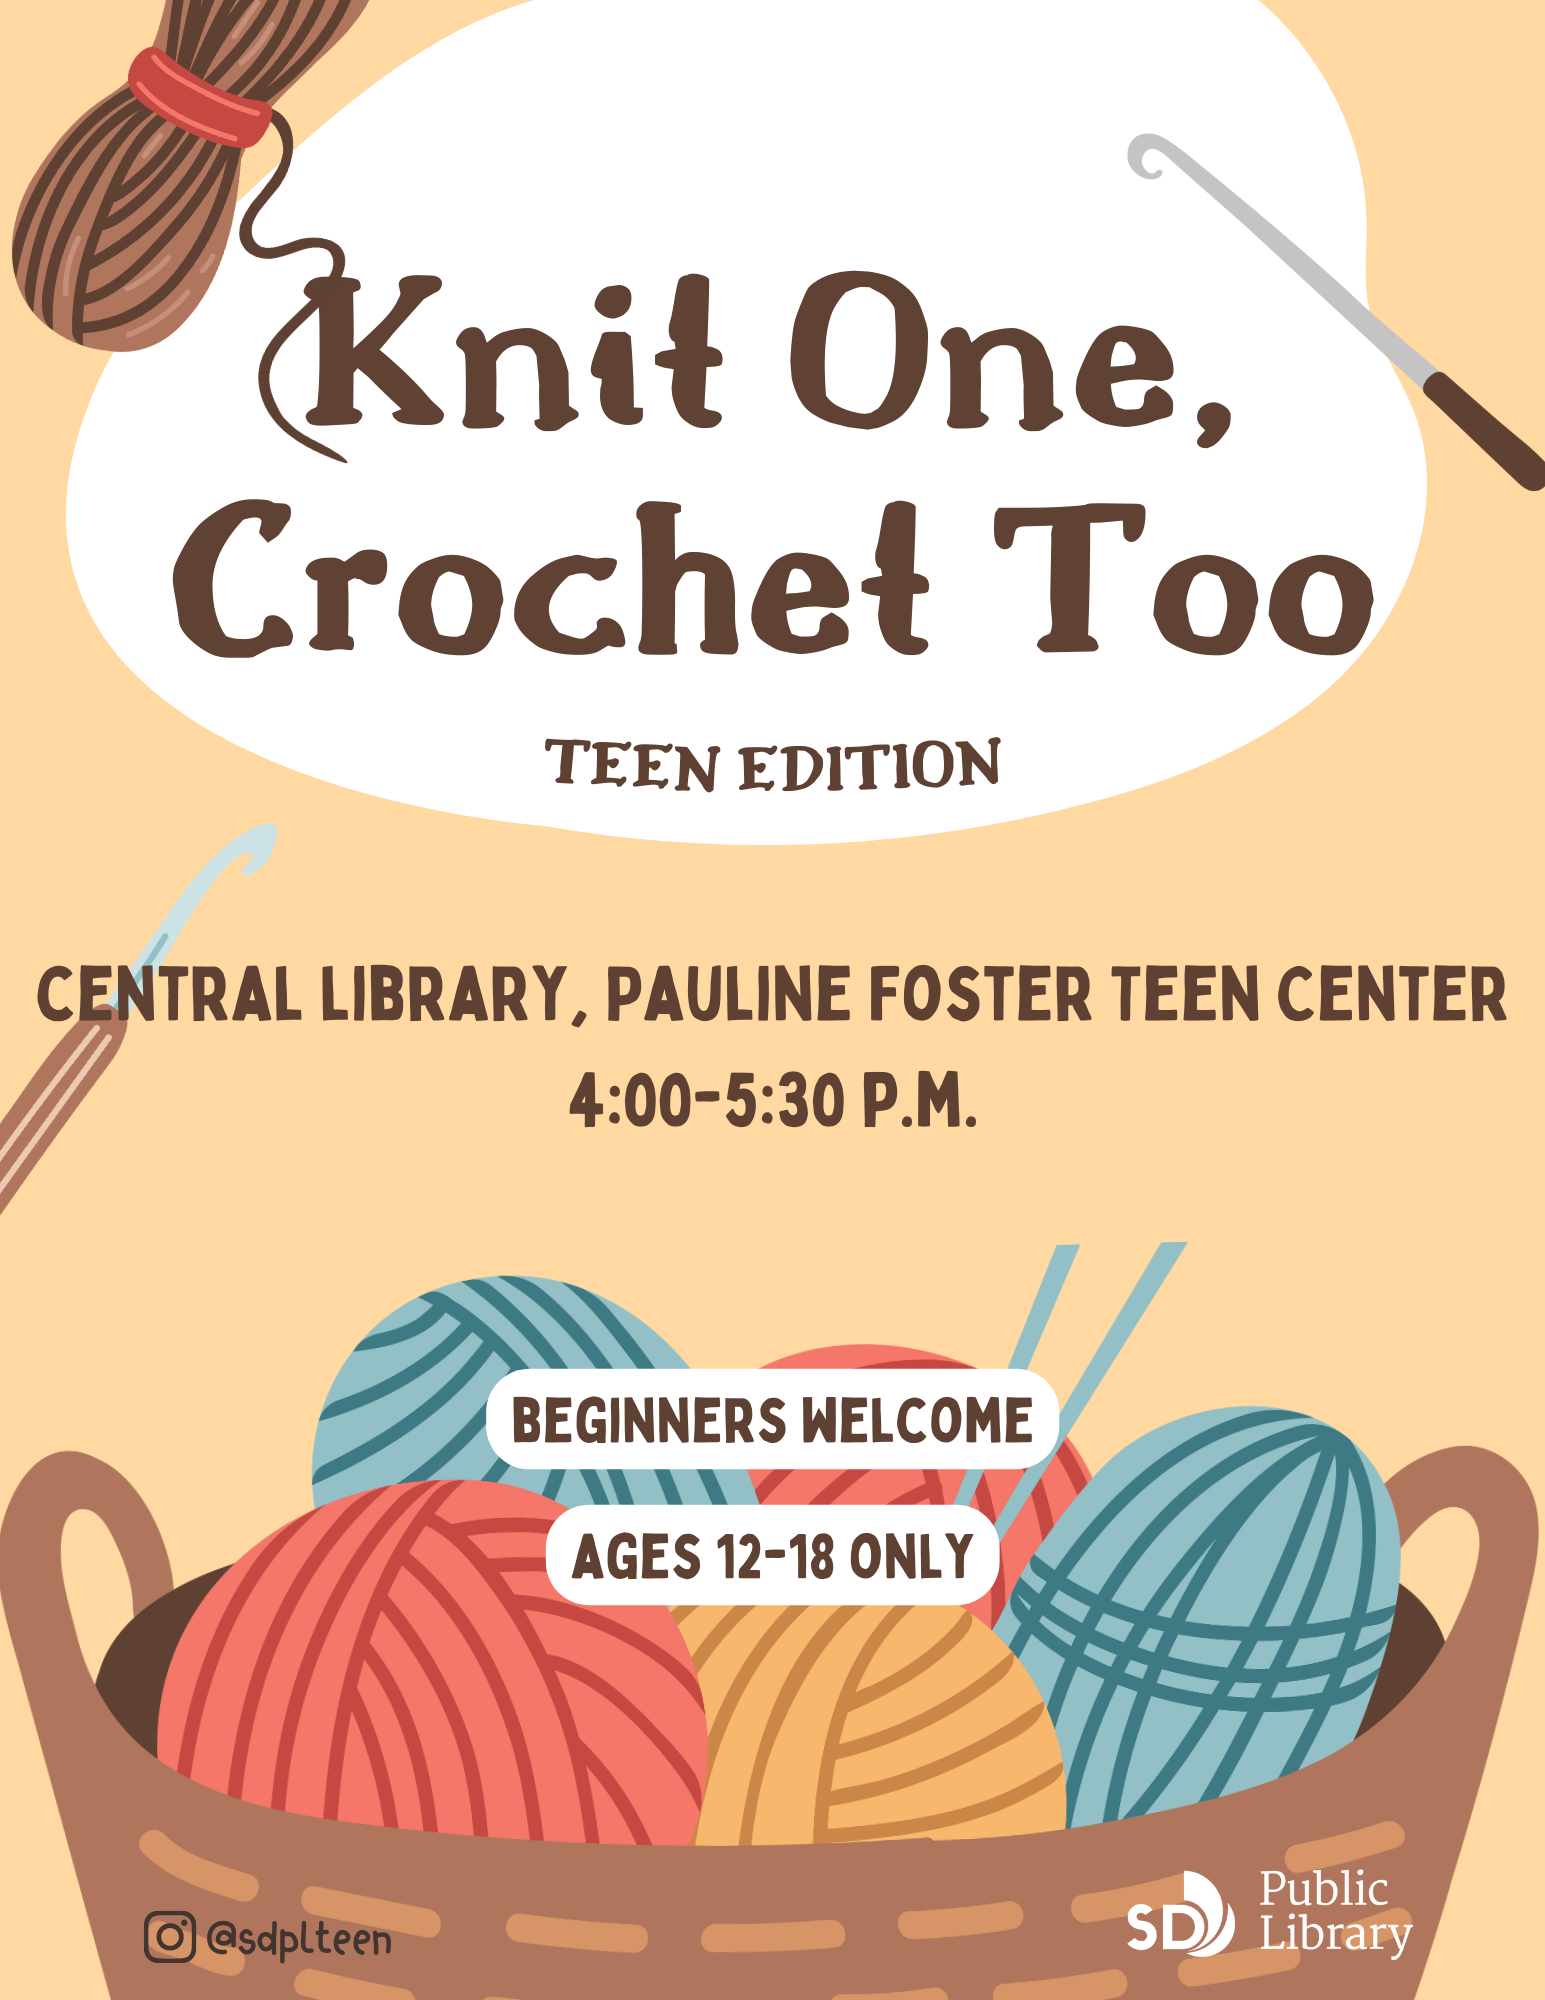 Knit One, Crochet Too (Teen Edition). Central Library, Pauline Foster Teen Center, 4-5:30pm. Beginners welcome. Ages 12-18 only.